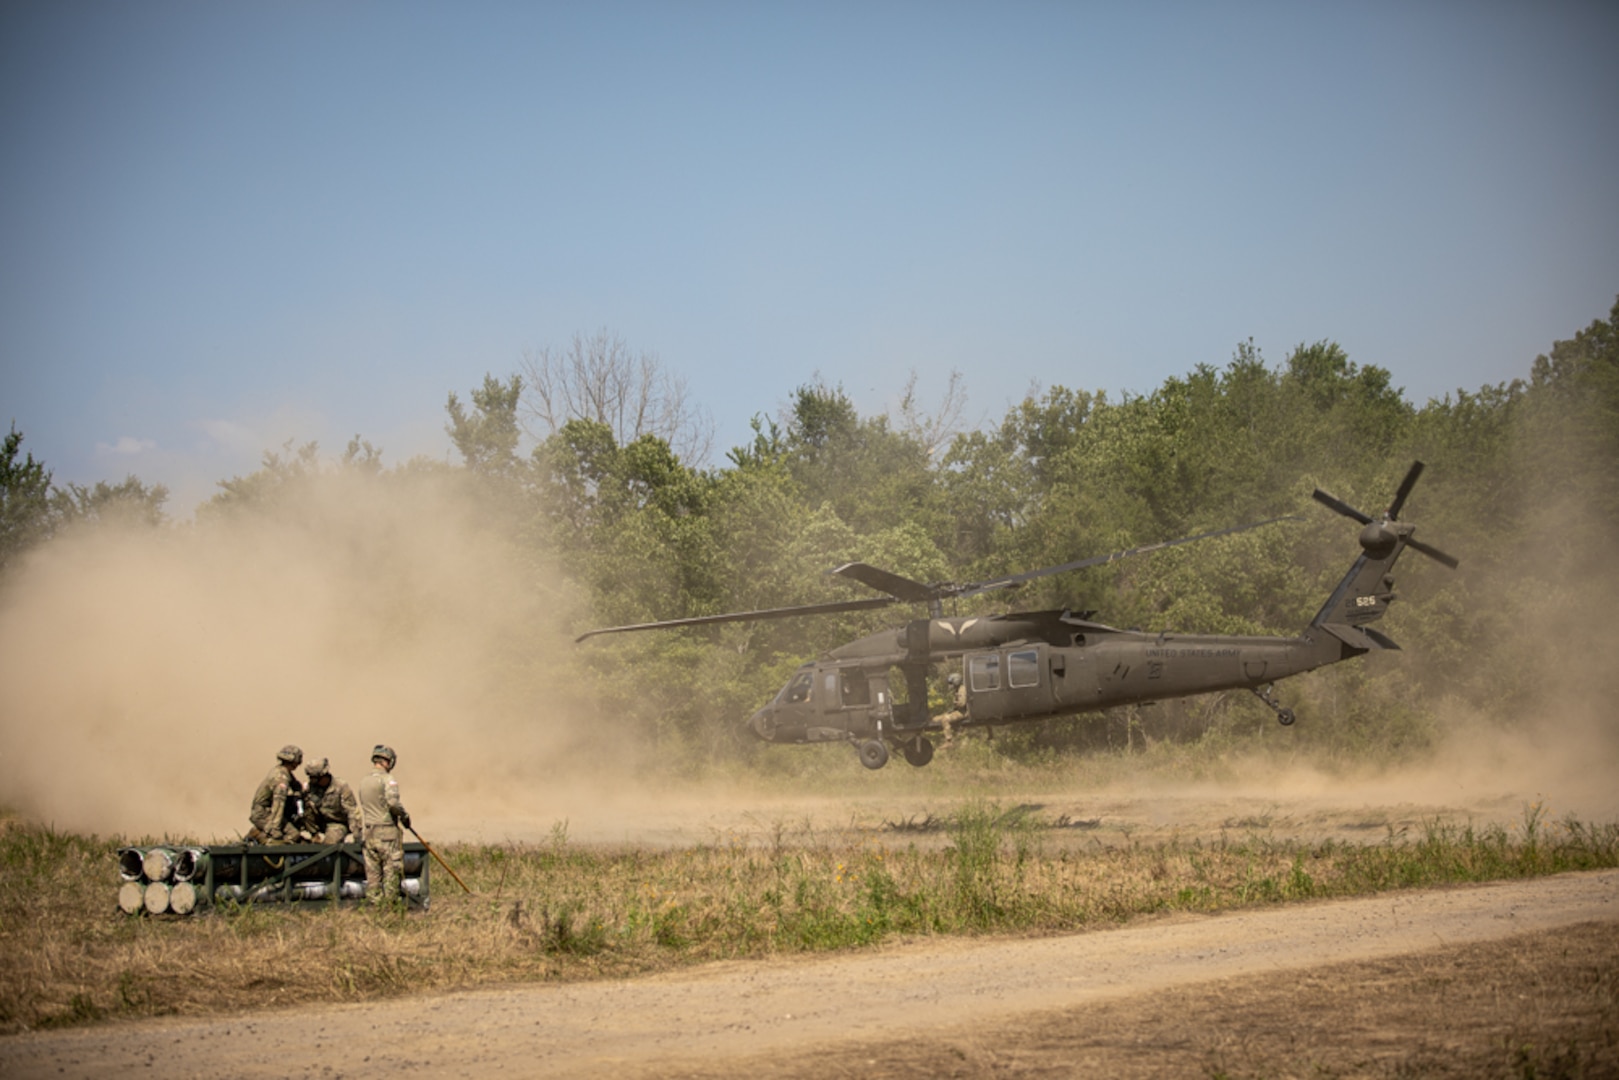 Soldiers with the 45th Field Artillery Brigade, Oklahoma Army National Guard, prepare for sling load training alongside members of Charlie Company, 1st Battalion, 244th Aviation Regiment, 90th Troop Command, during exercise Western Strike at Fort Chaffee, Arkansas, June 22, 2023. Western Strike is a highly immersive and fully instrumented training comparable to a combat training center that aims to prepare units like the 45th FAB for overseas operations. (Oklahoma National Guard photo by Spc. Danielle Rayon)